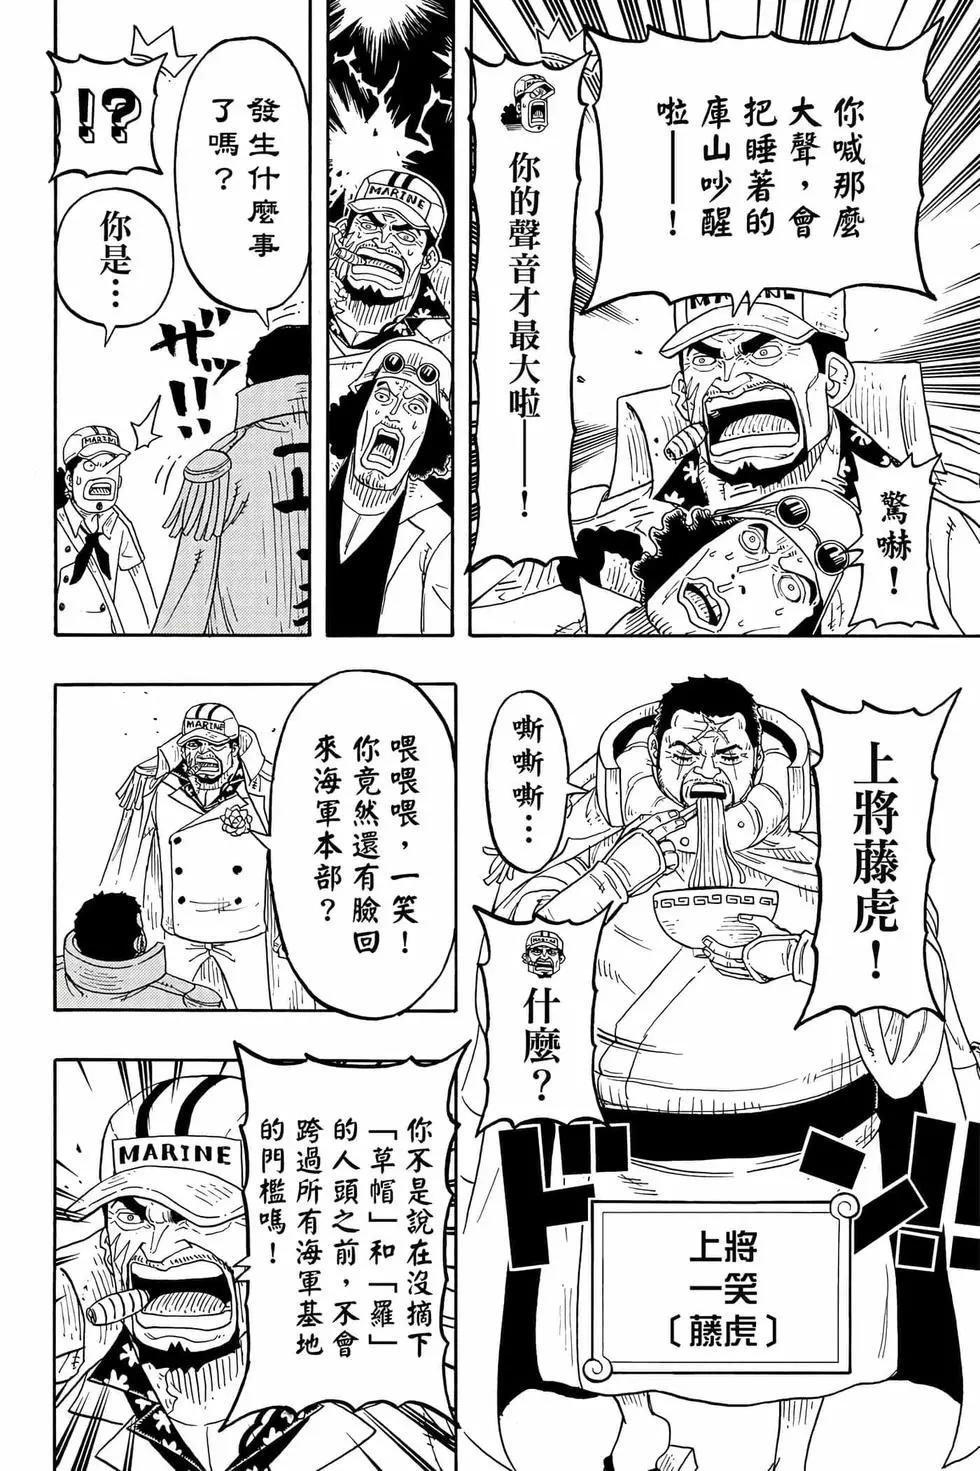 One piece party - 第04卷(1/4) - 1